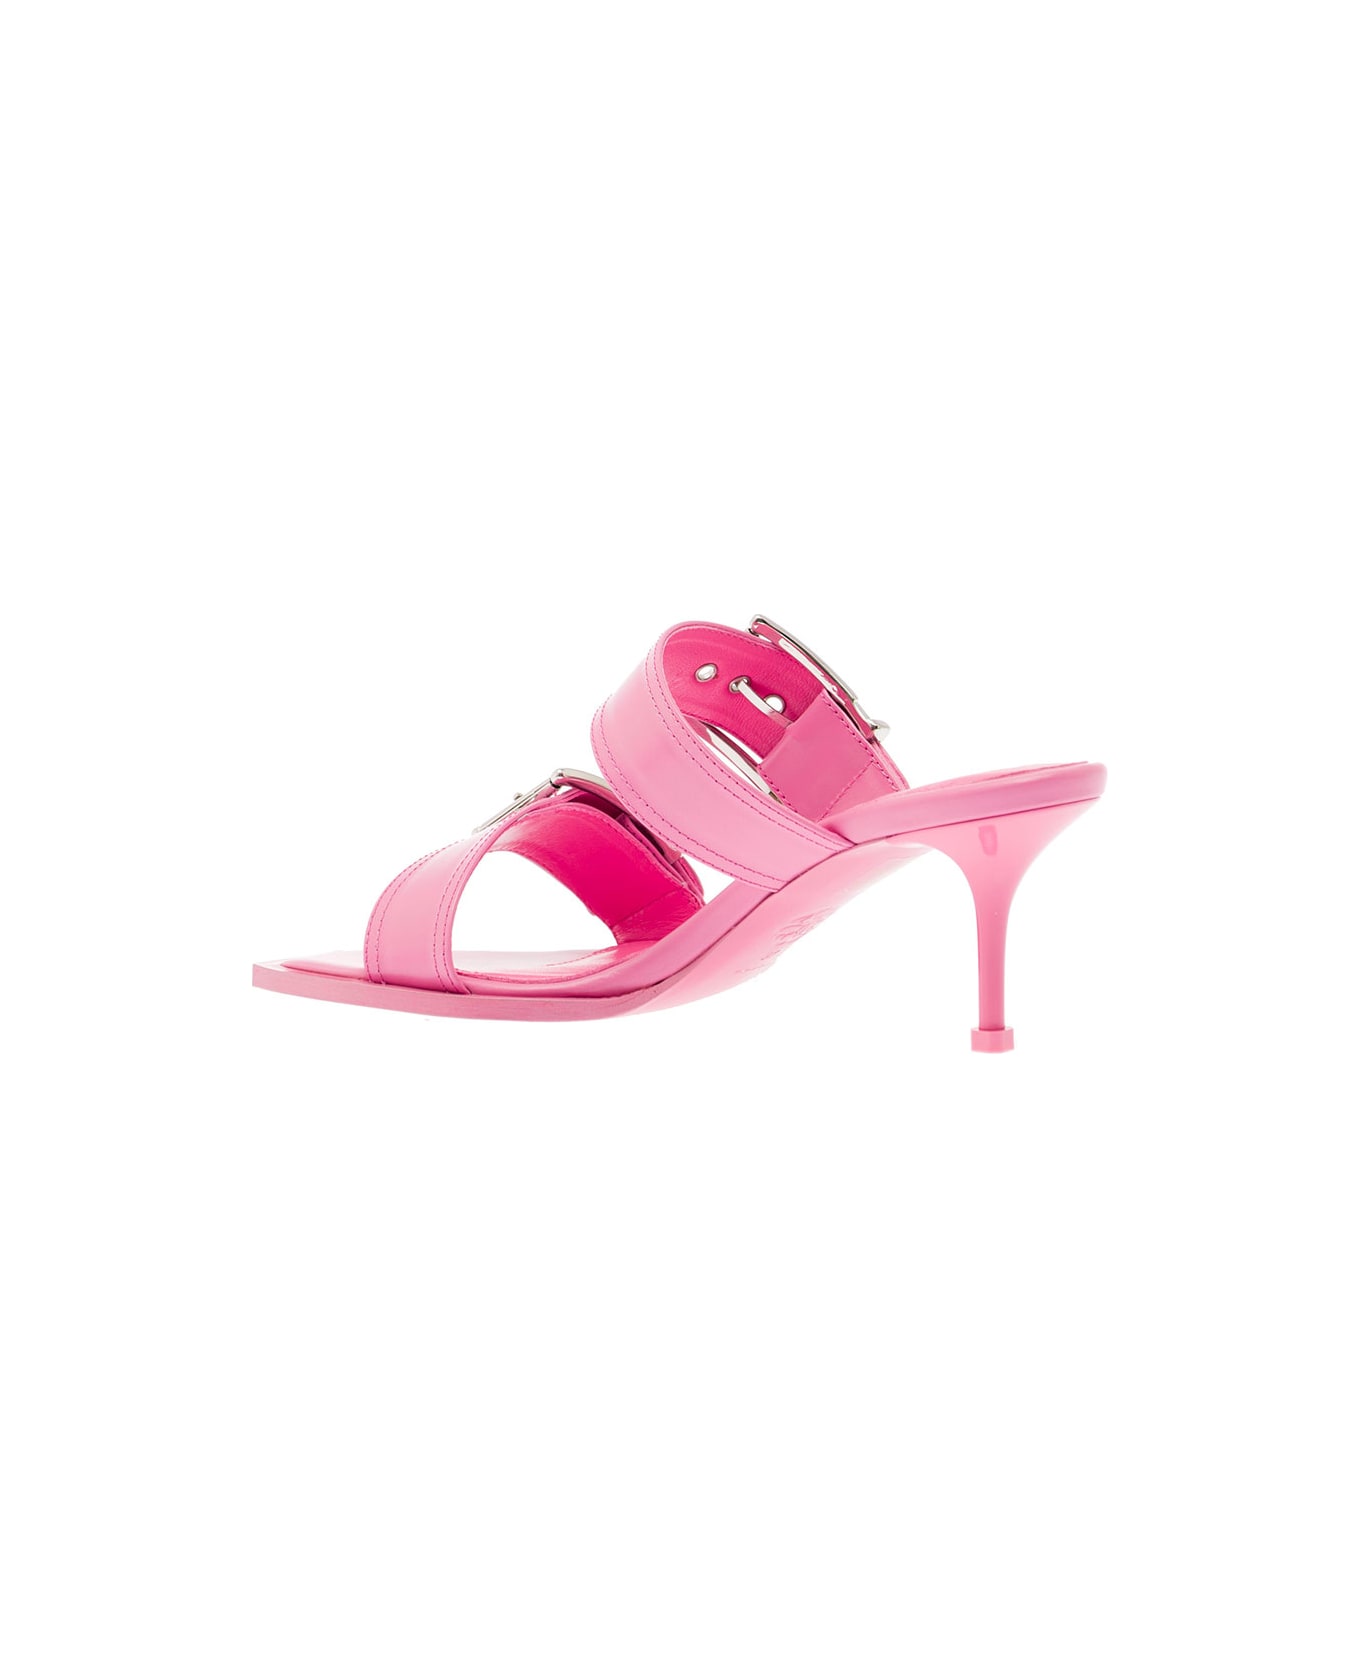 Alexander McQueen 'punk' Pink Sandals With Double Strap And Metal Buckles In Leather Woman - Pink